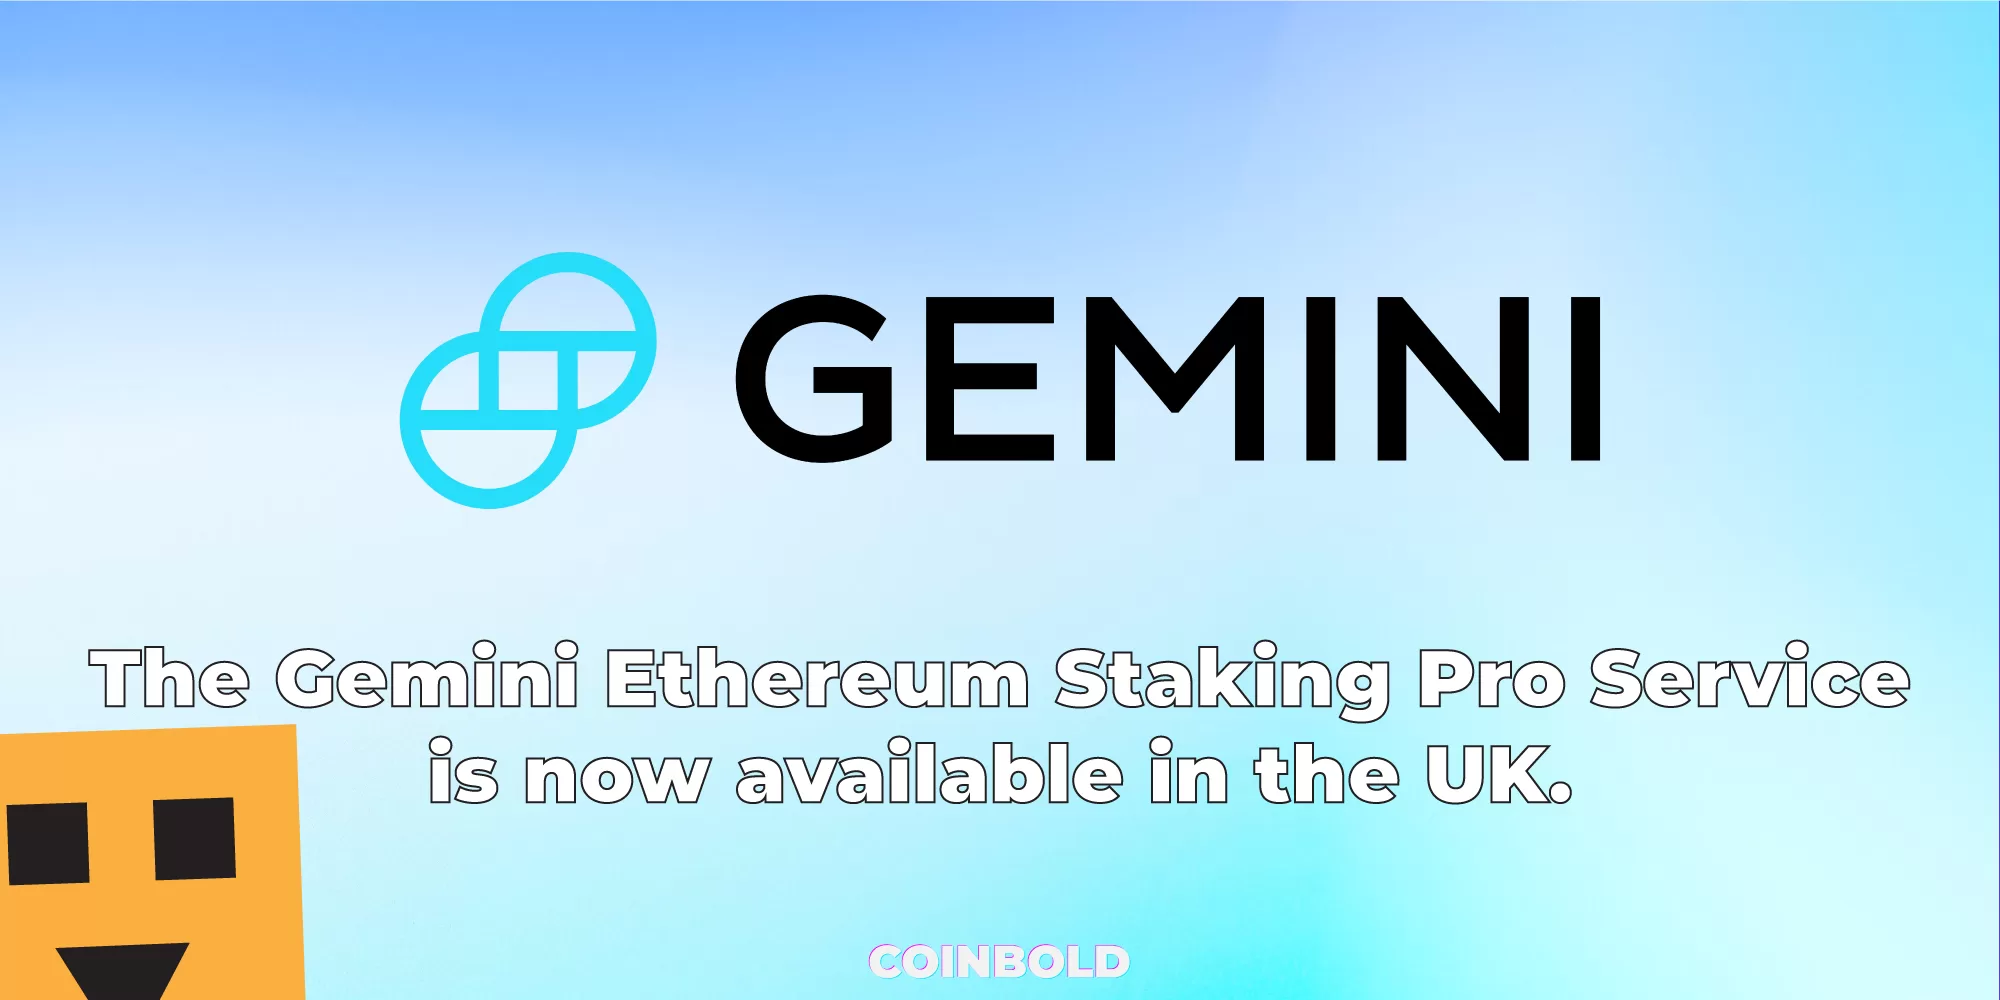 The Gemini Ethereum Staking Pro Service is now available in the UK.